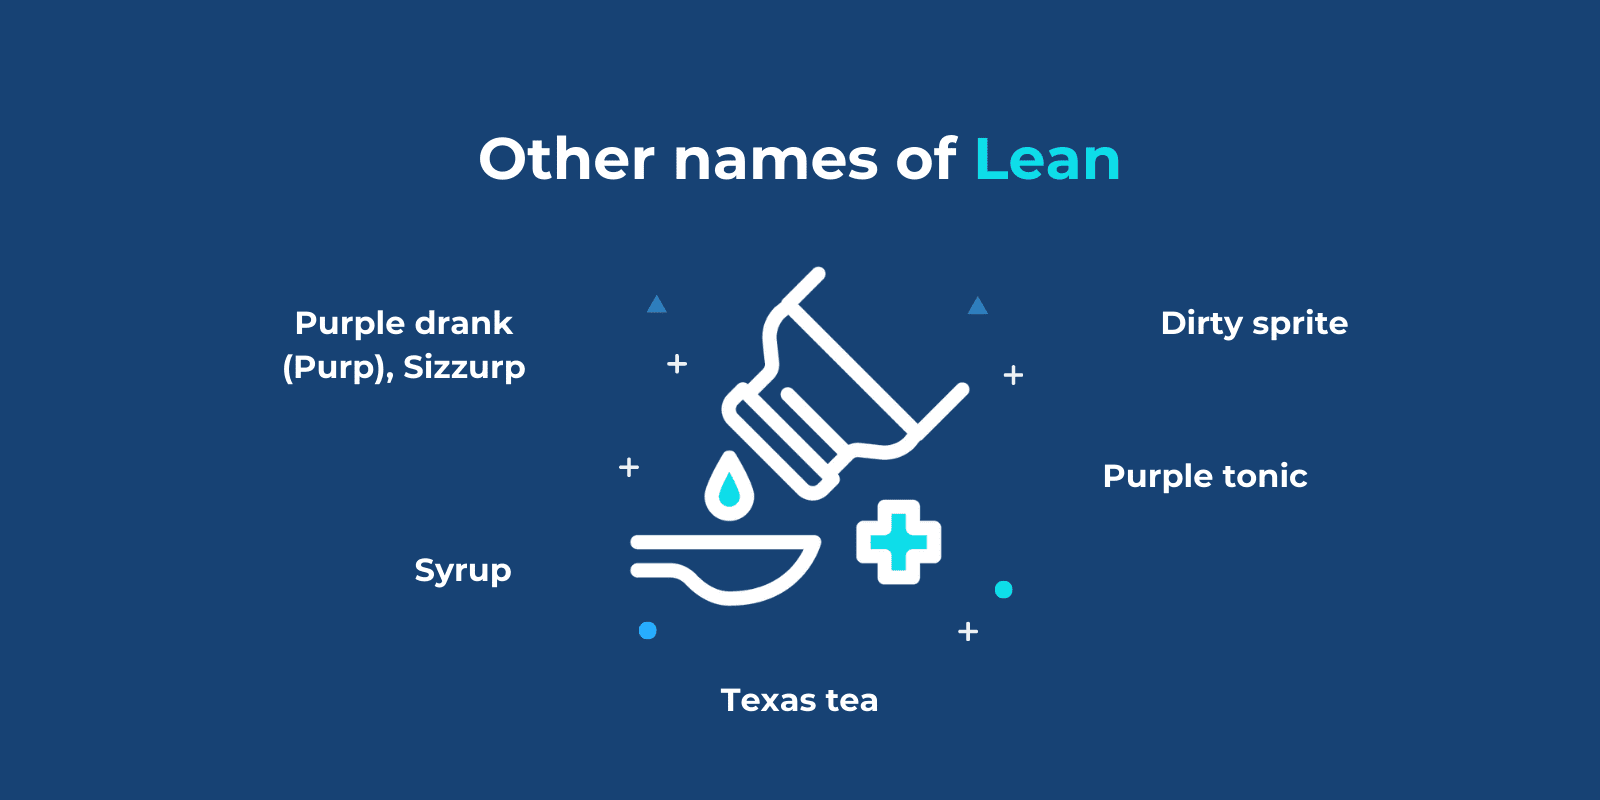 "Other names of Lean" title written above a cough syrup icon surrounded by different names of lean